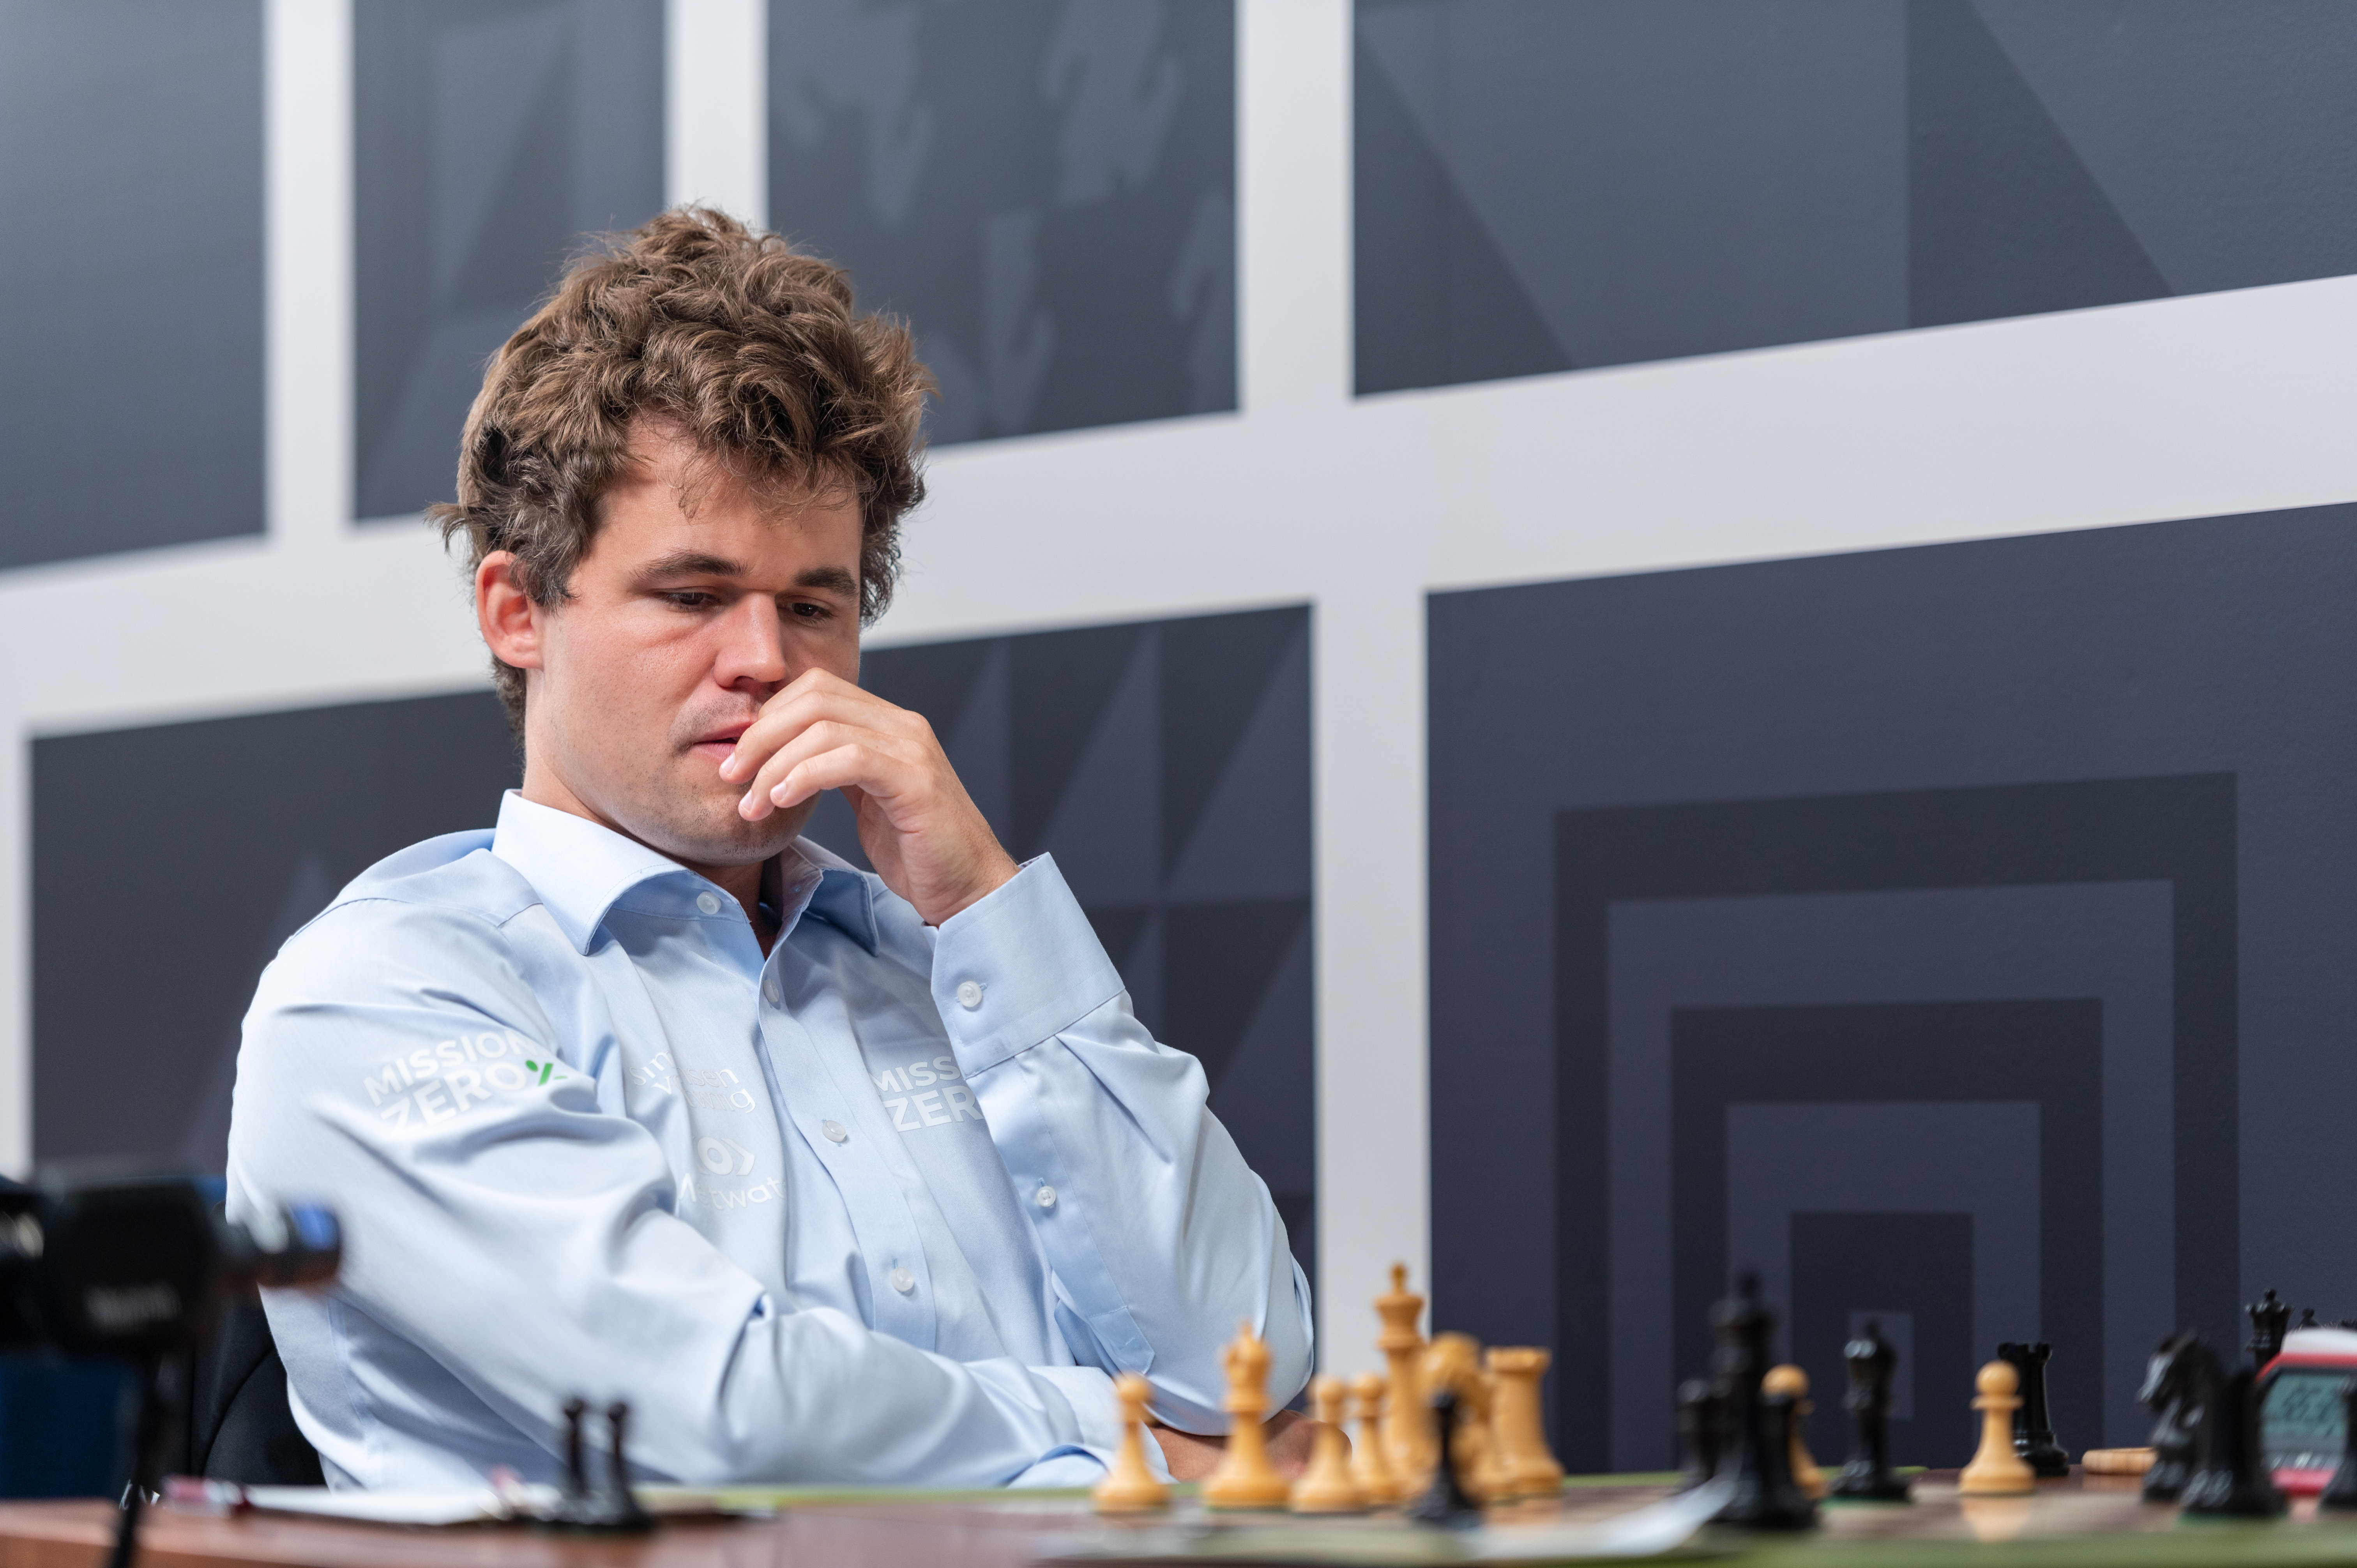 Hans Niemann: Chess champion 'likely cheated' in more than 100